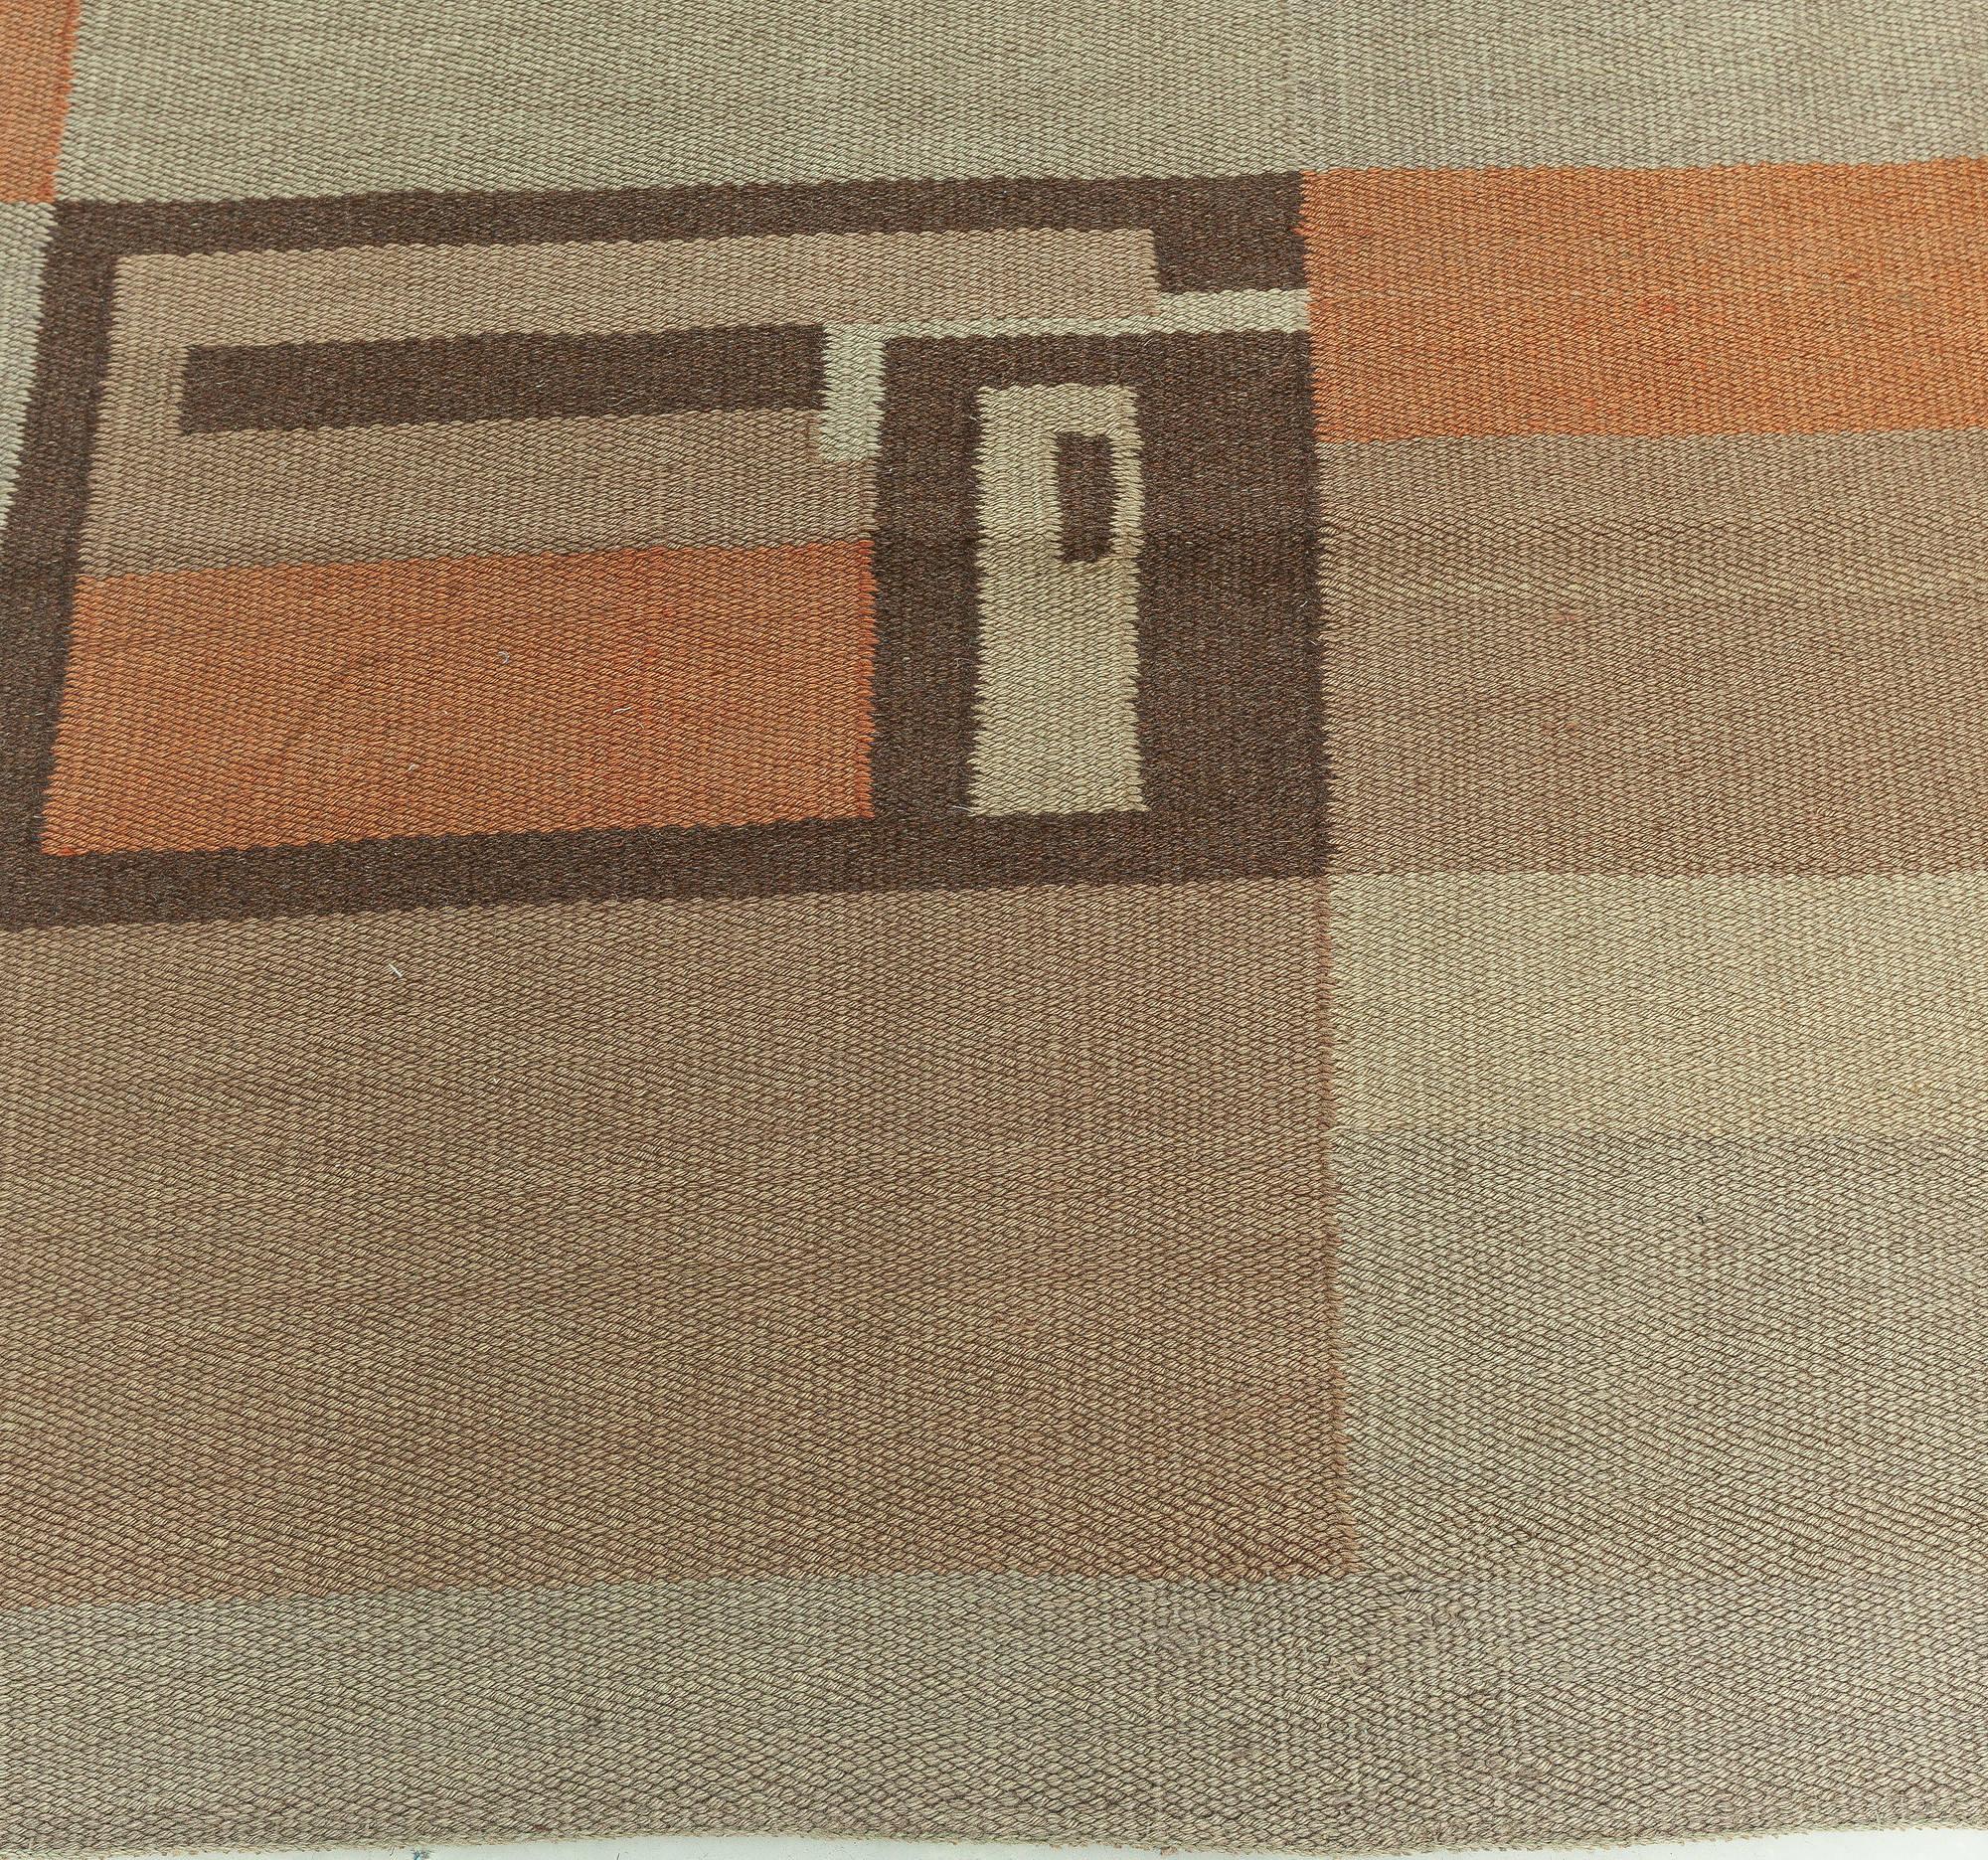 Midcentury Scandinavian Geometric Handmade Wool Rug In Good Condition For Sale In New York, NY